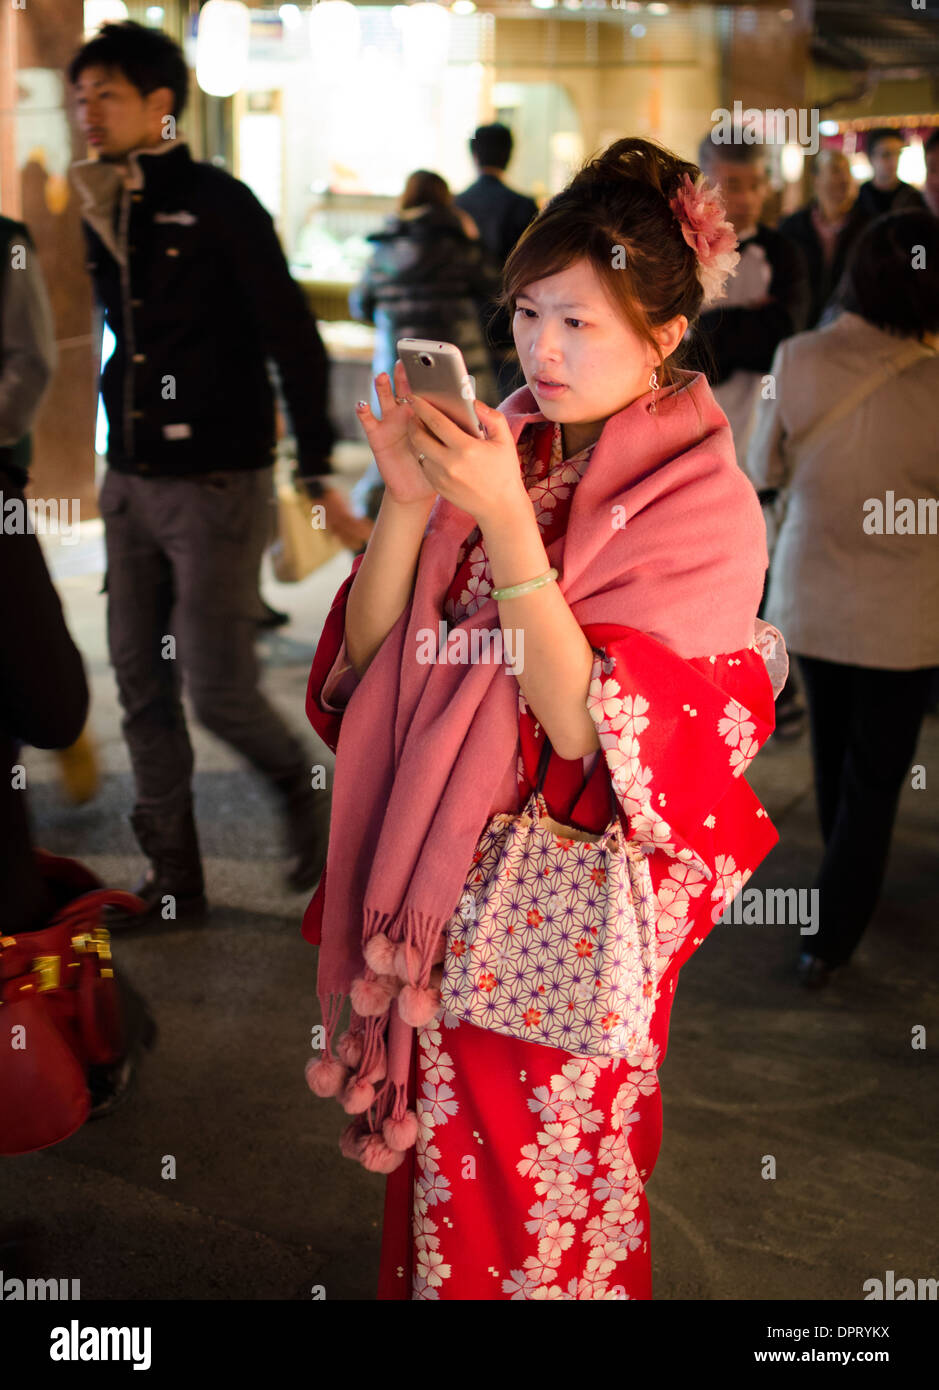 Young Japanese girl wearing a flowery red winter kimono on a cool autumn evening, while using a smartphone. Stock Photo